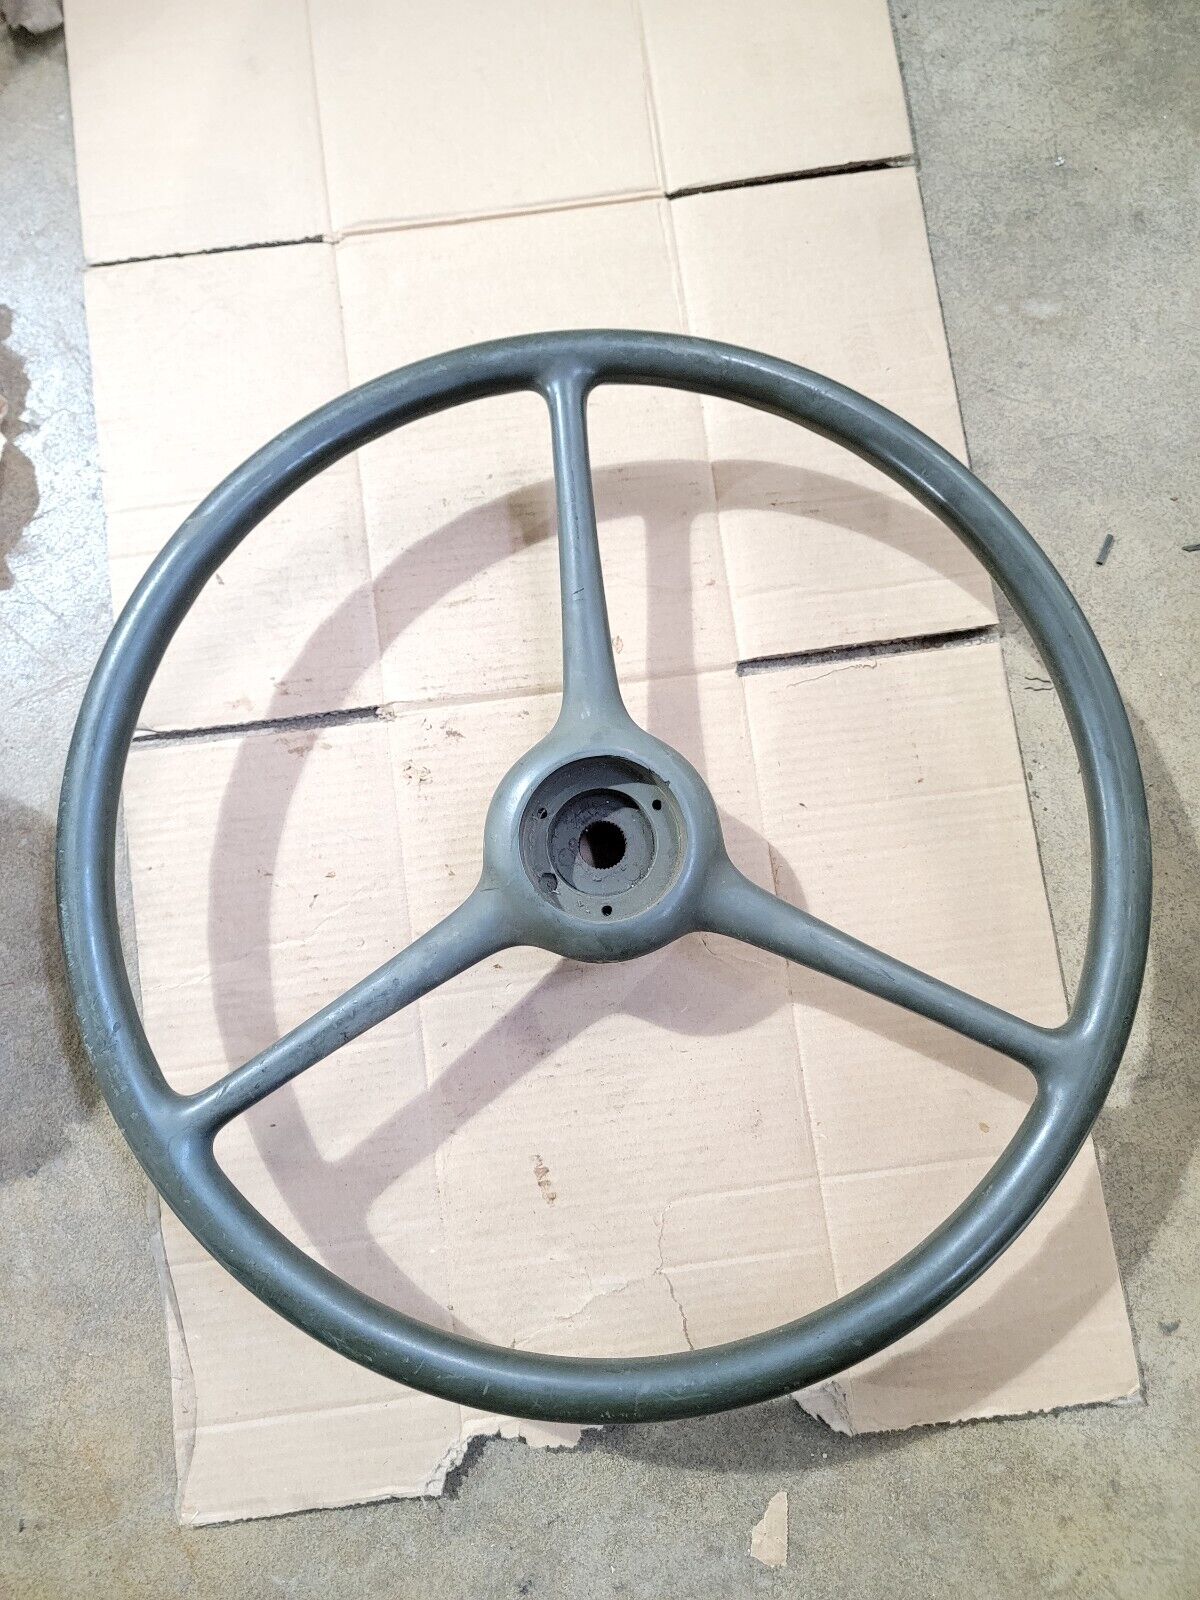 NOS 20 Inch Steering Wheel For 2 1/2 Ton 6x6 M35 M35A2 Truck Series P/N: 7521474